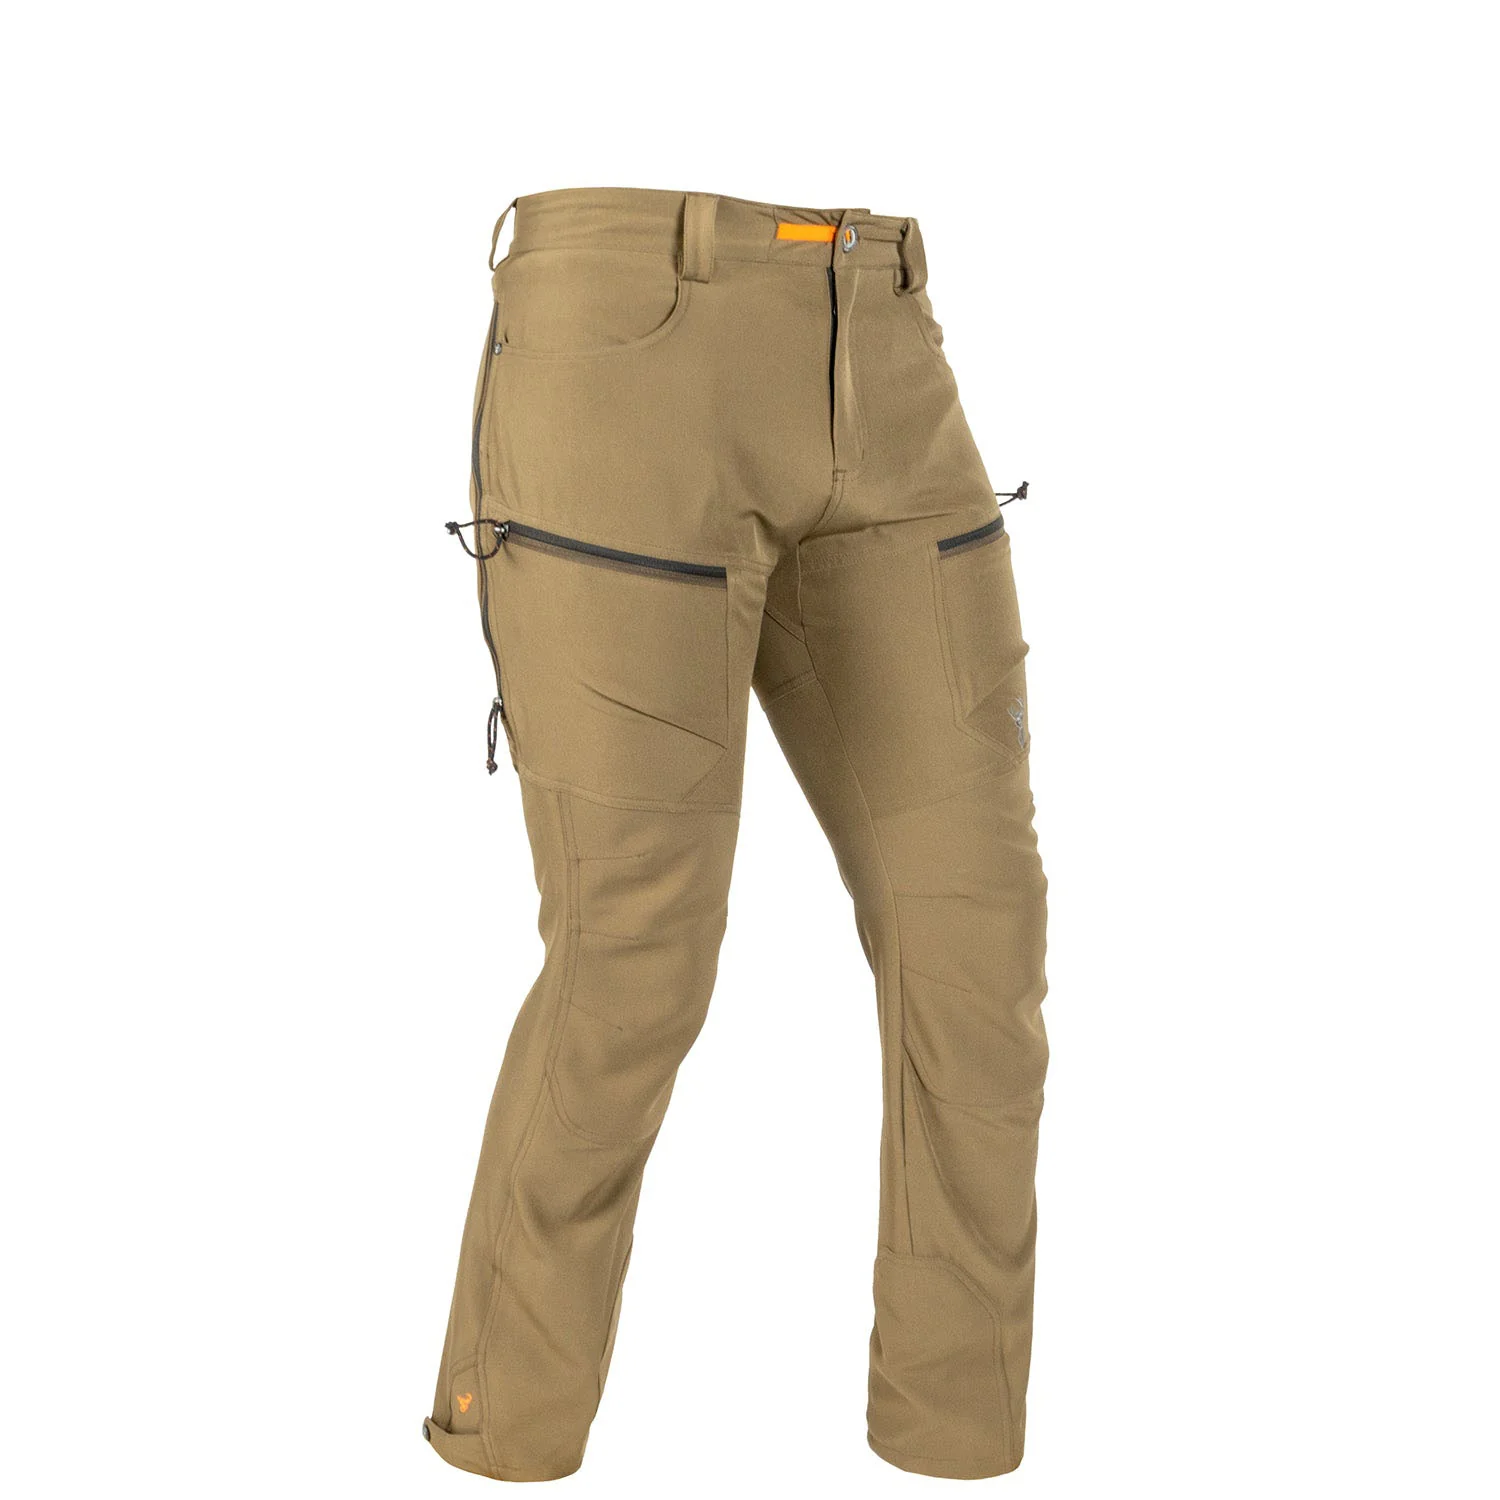 Hunters Element Spur Trousers - Tussock